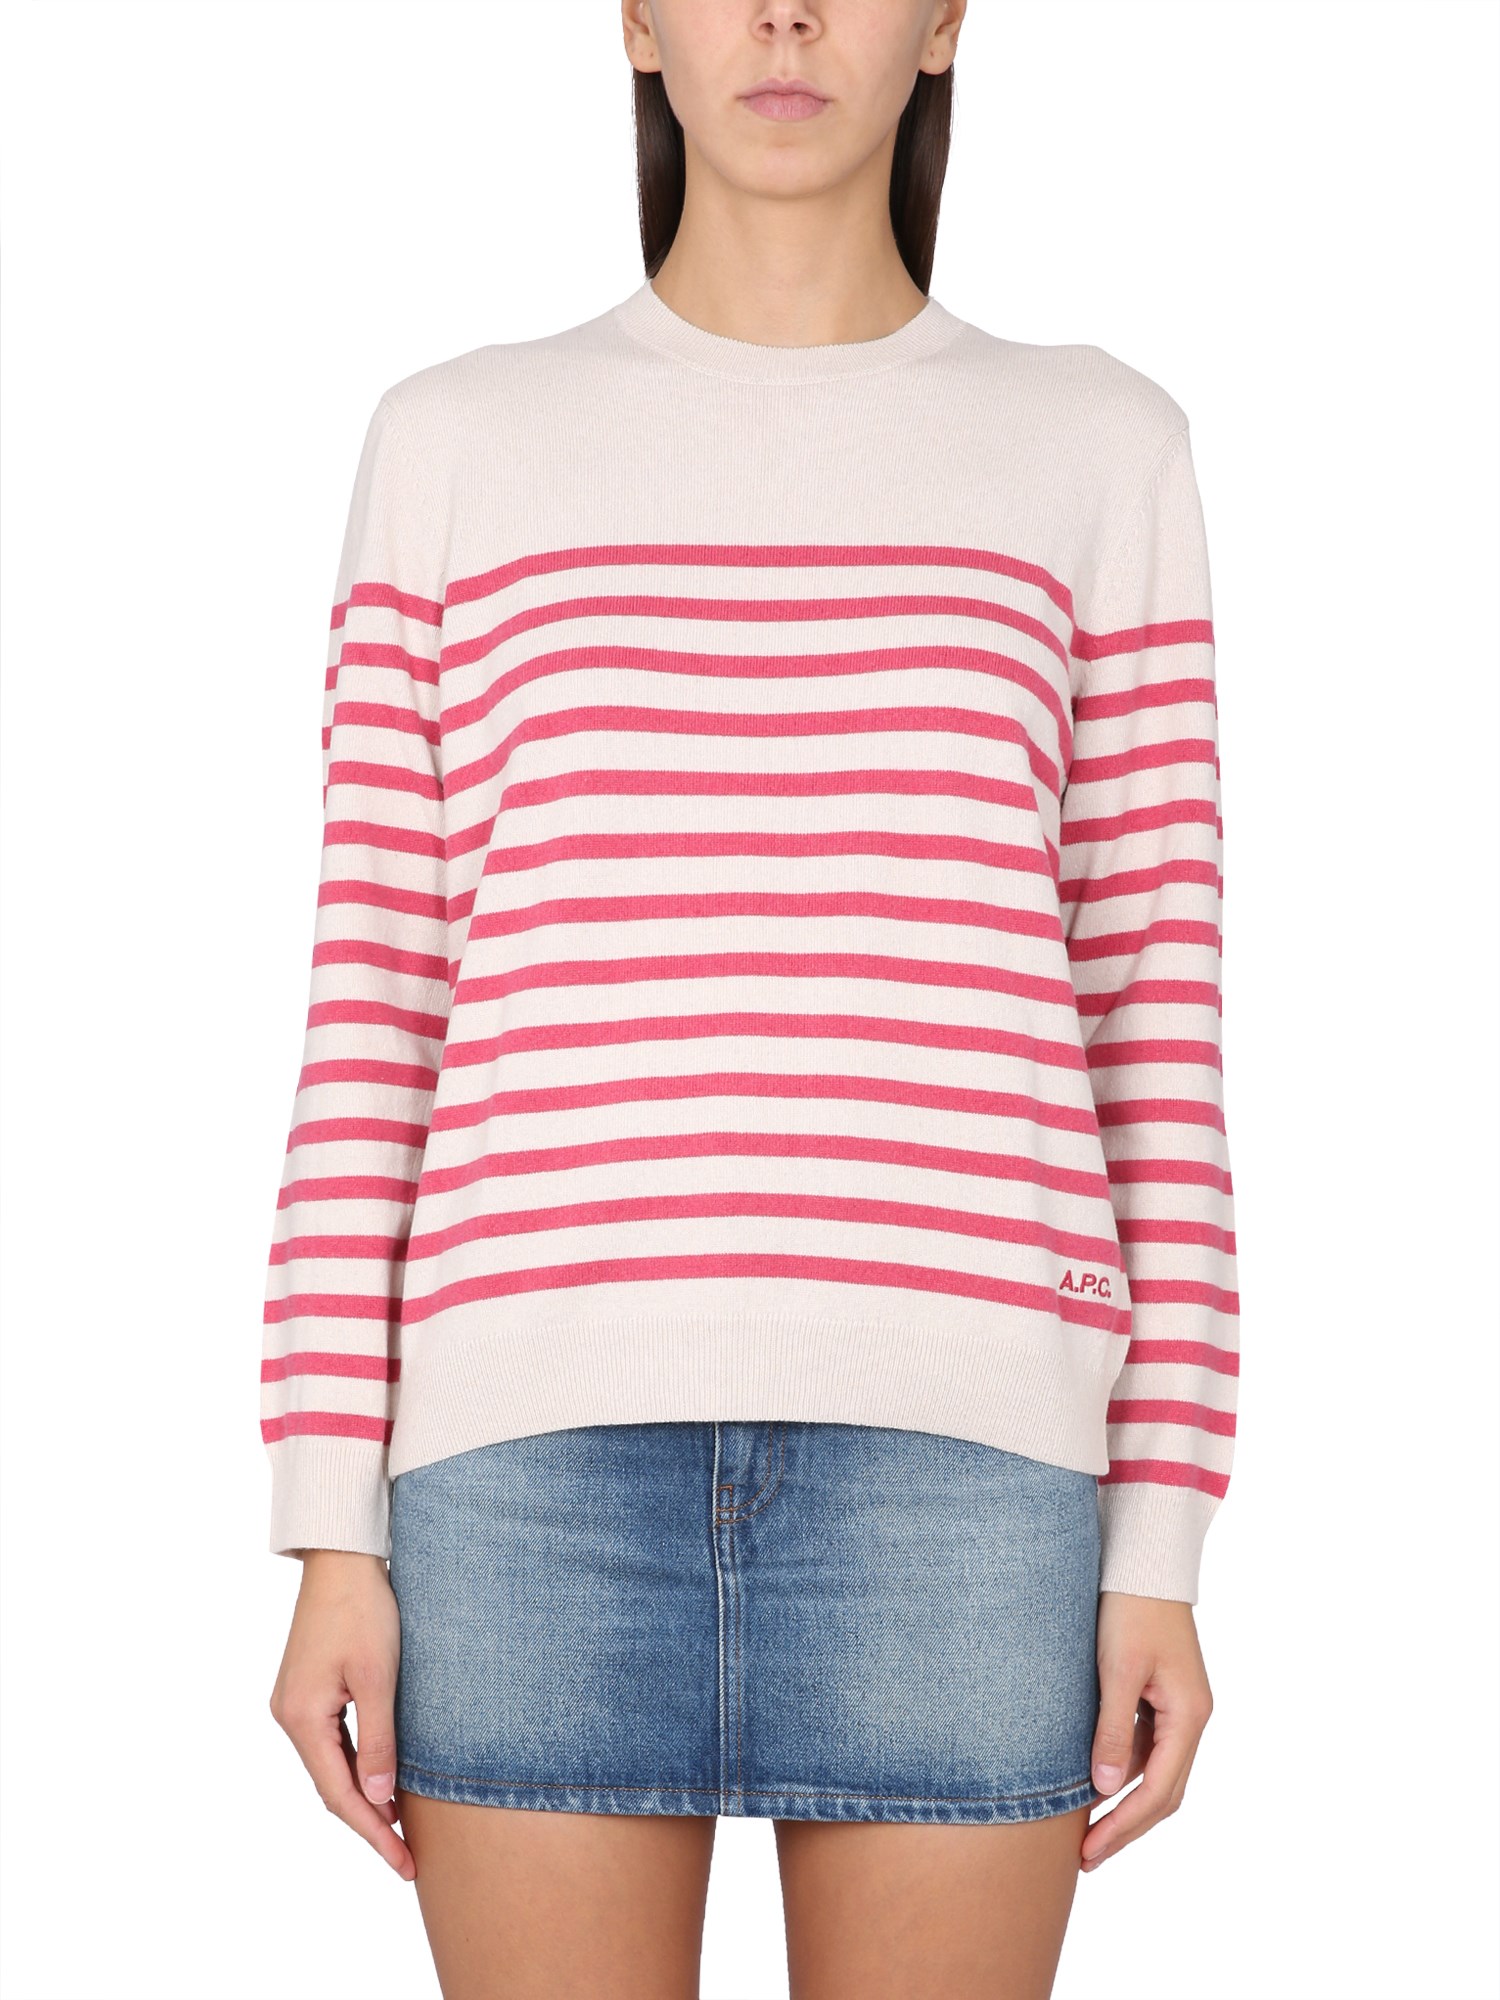 Shop Apc A. P.c. Jersey With Stripe Pattern In White